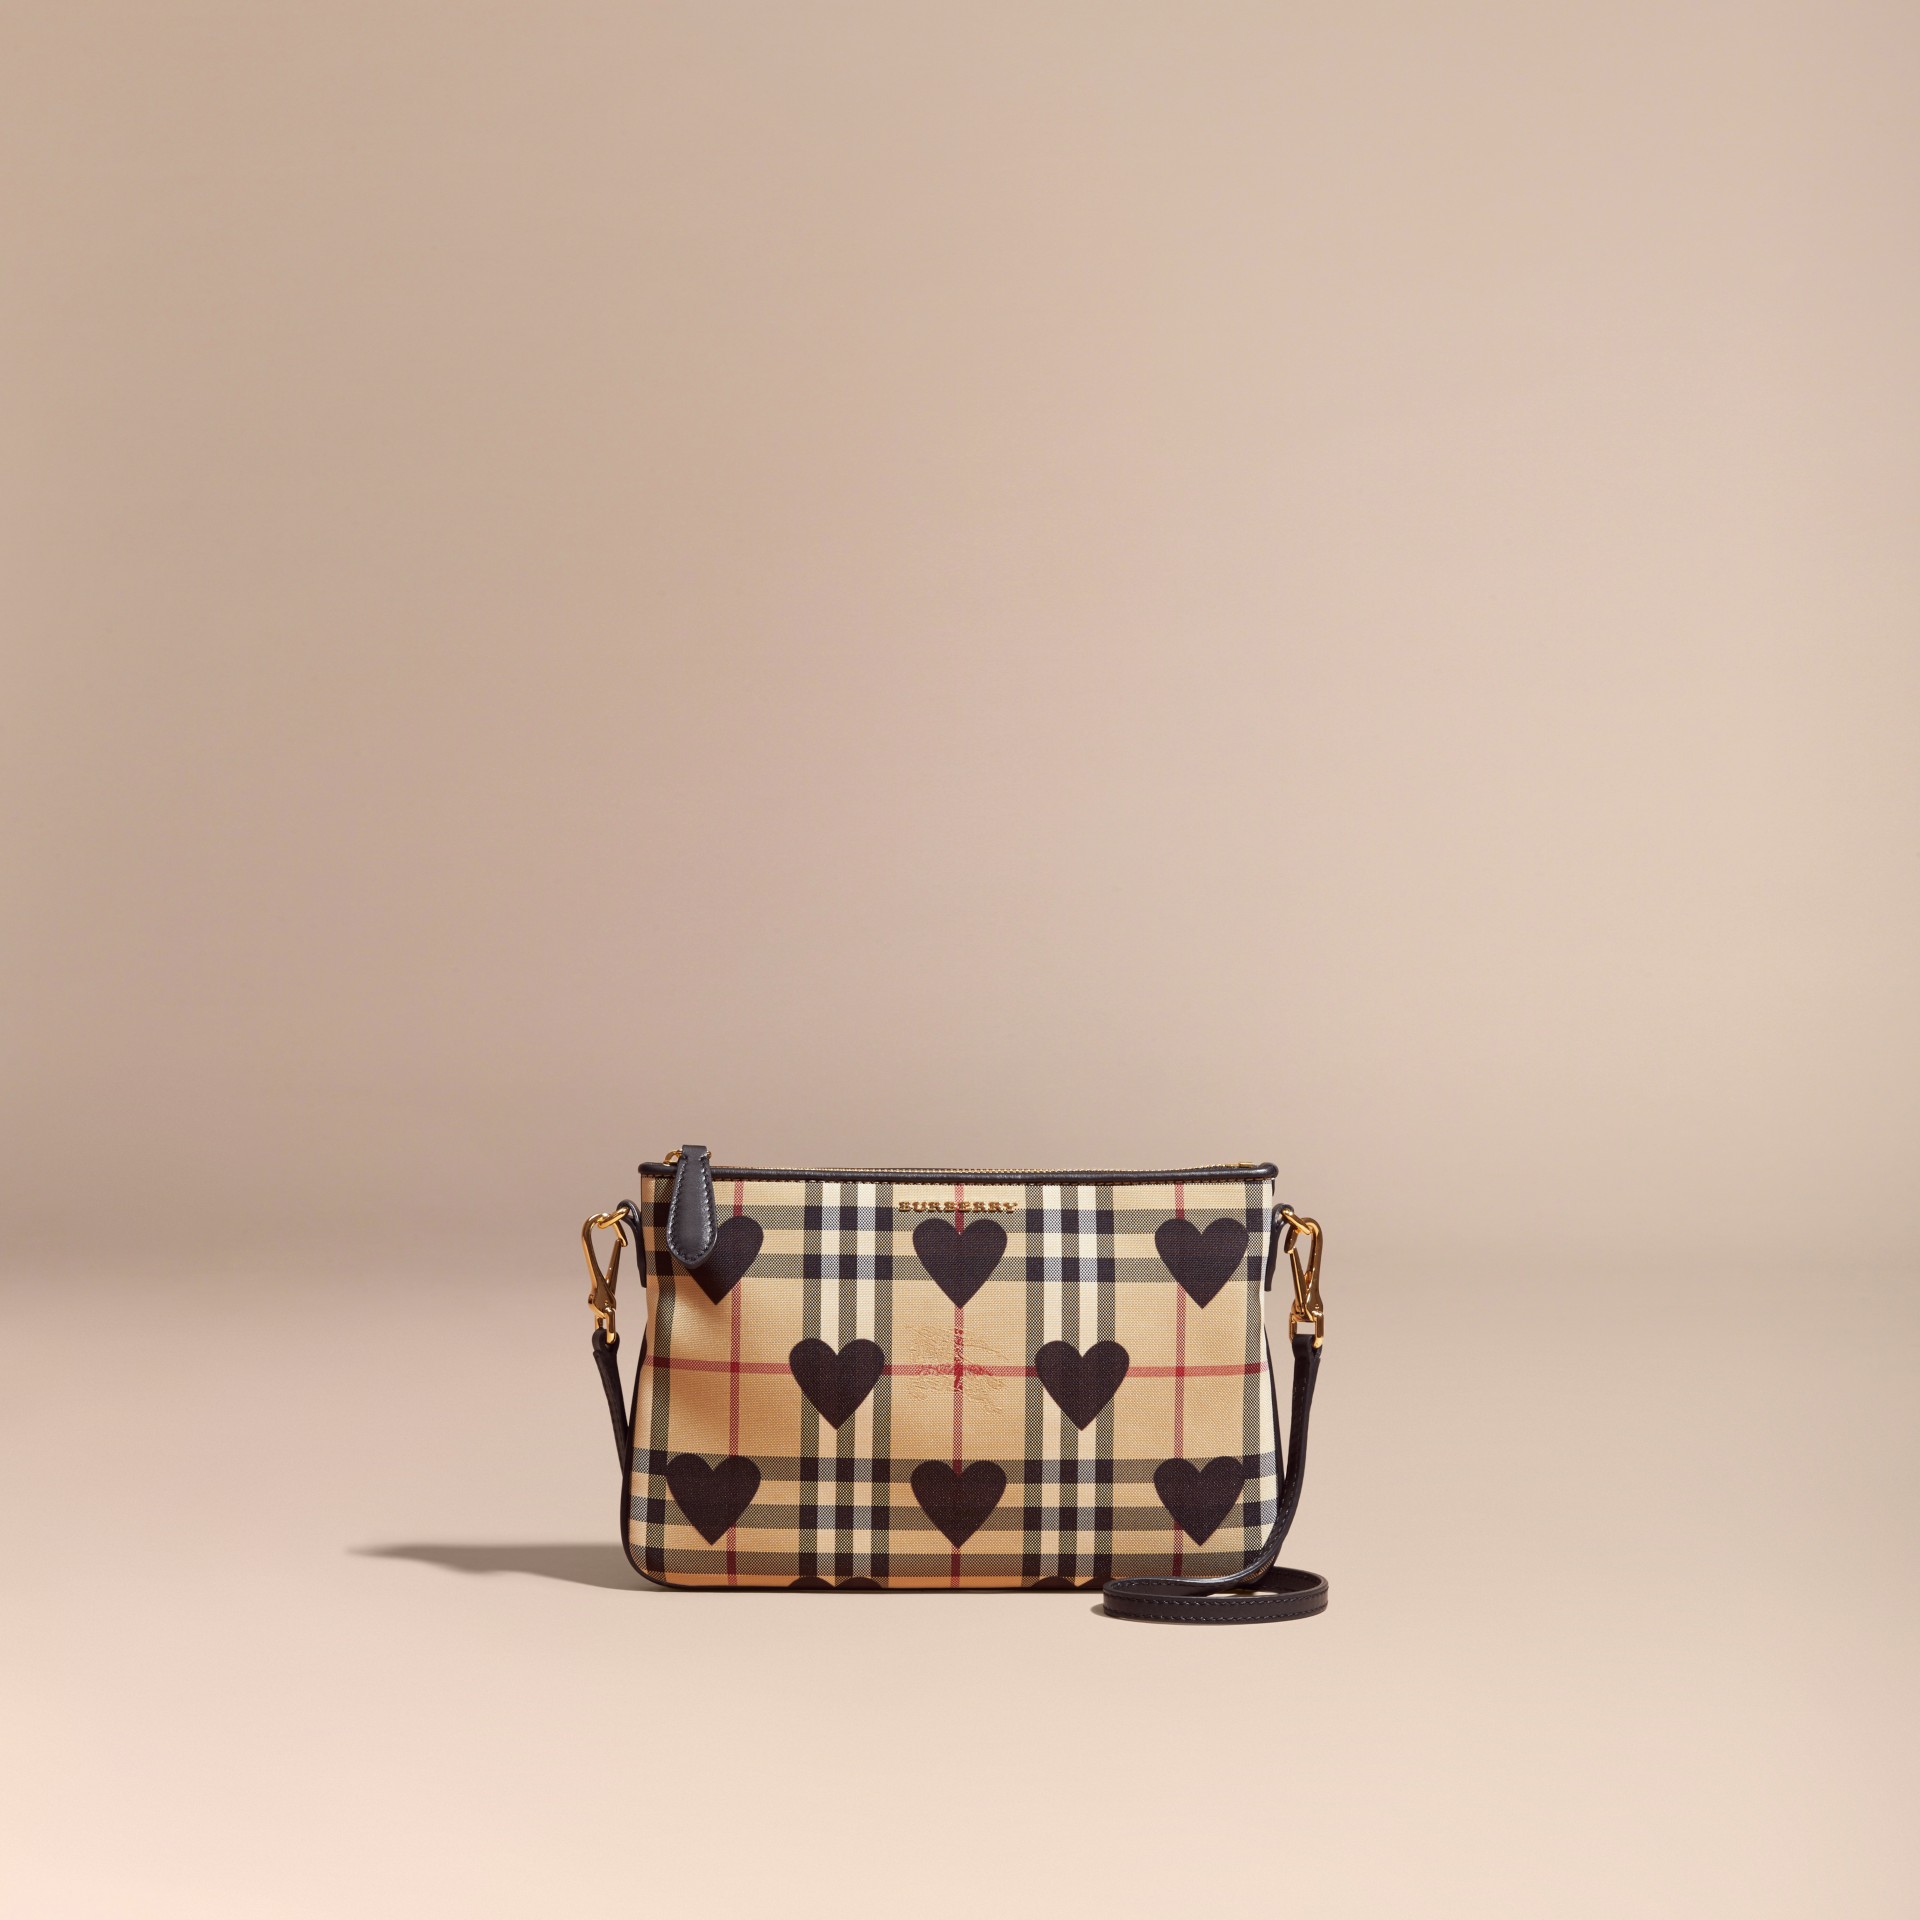 Heart Print Check and Leather Clutch Bag in Black | Burberry United States